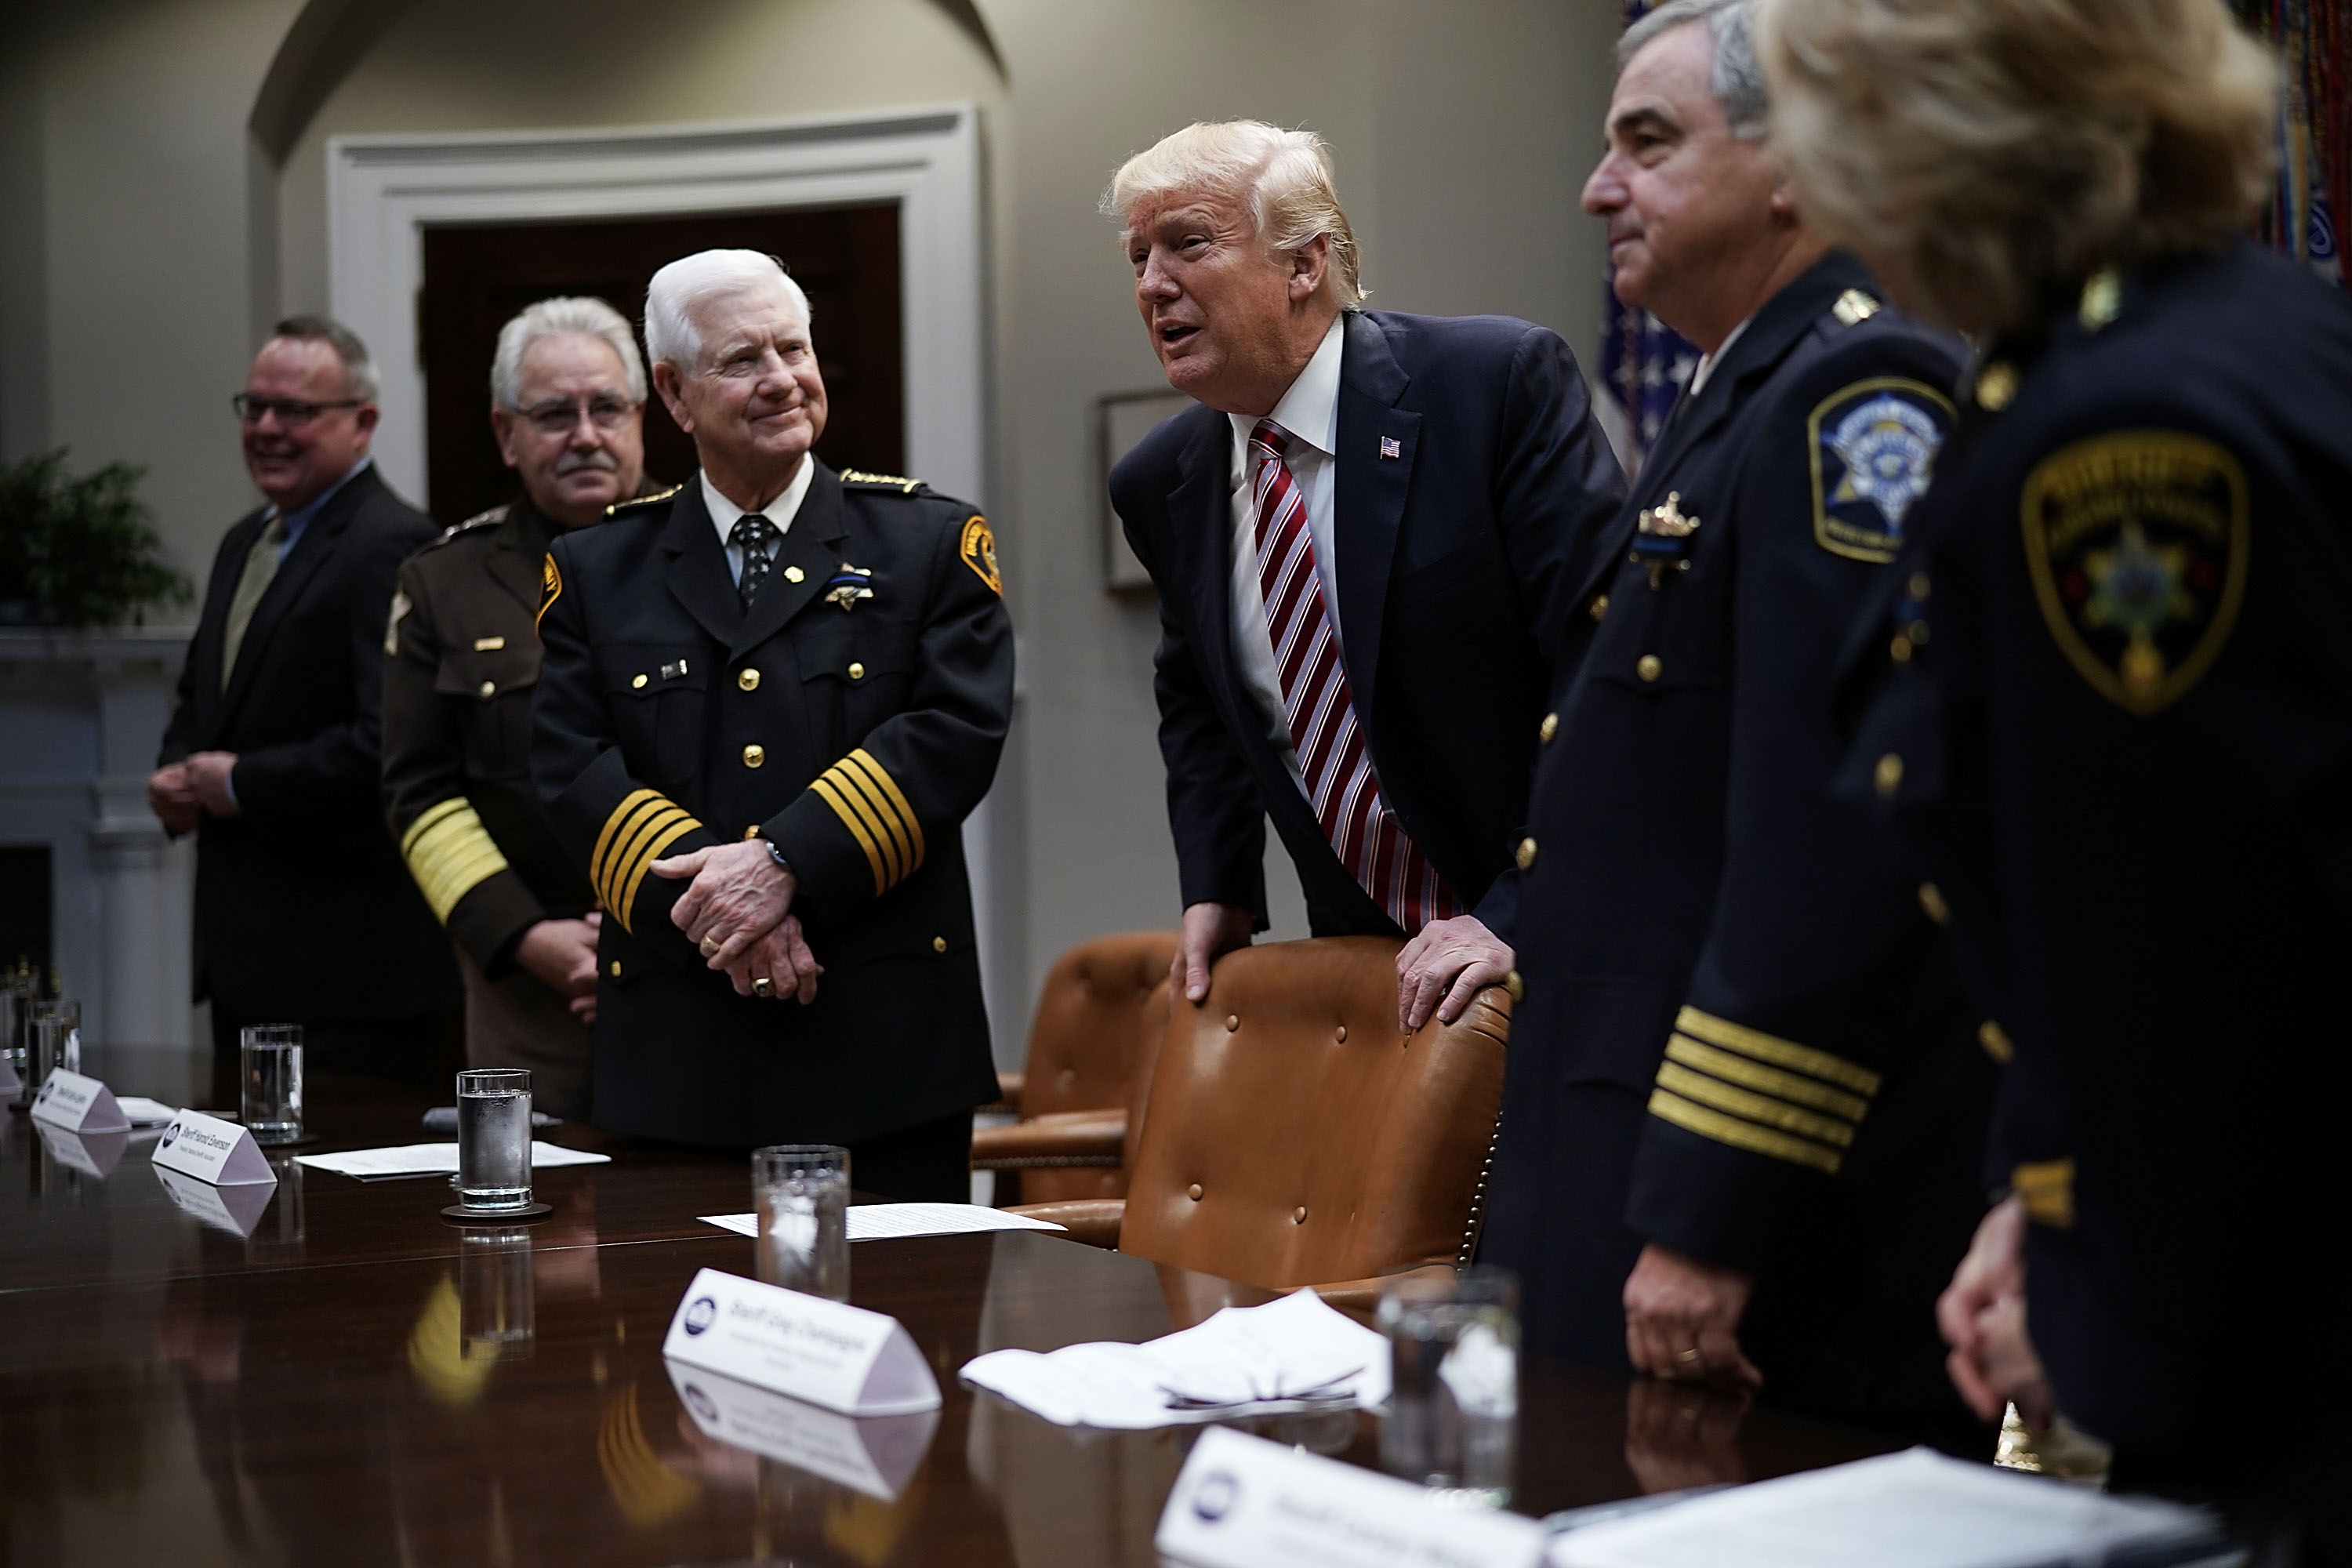 President Donald Trump greets representatives of the National Sheriffs' Association at the White House on February 13, 2018. (Alex Wong/Getty Images)